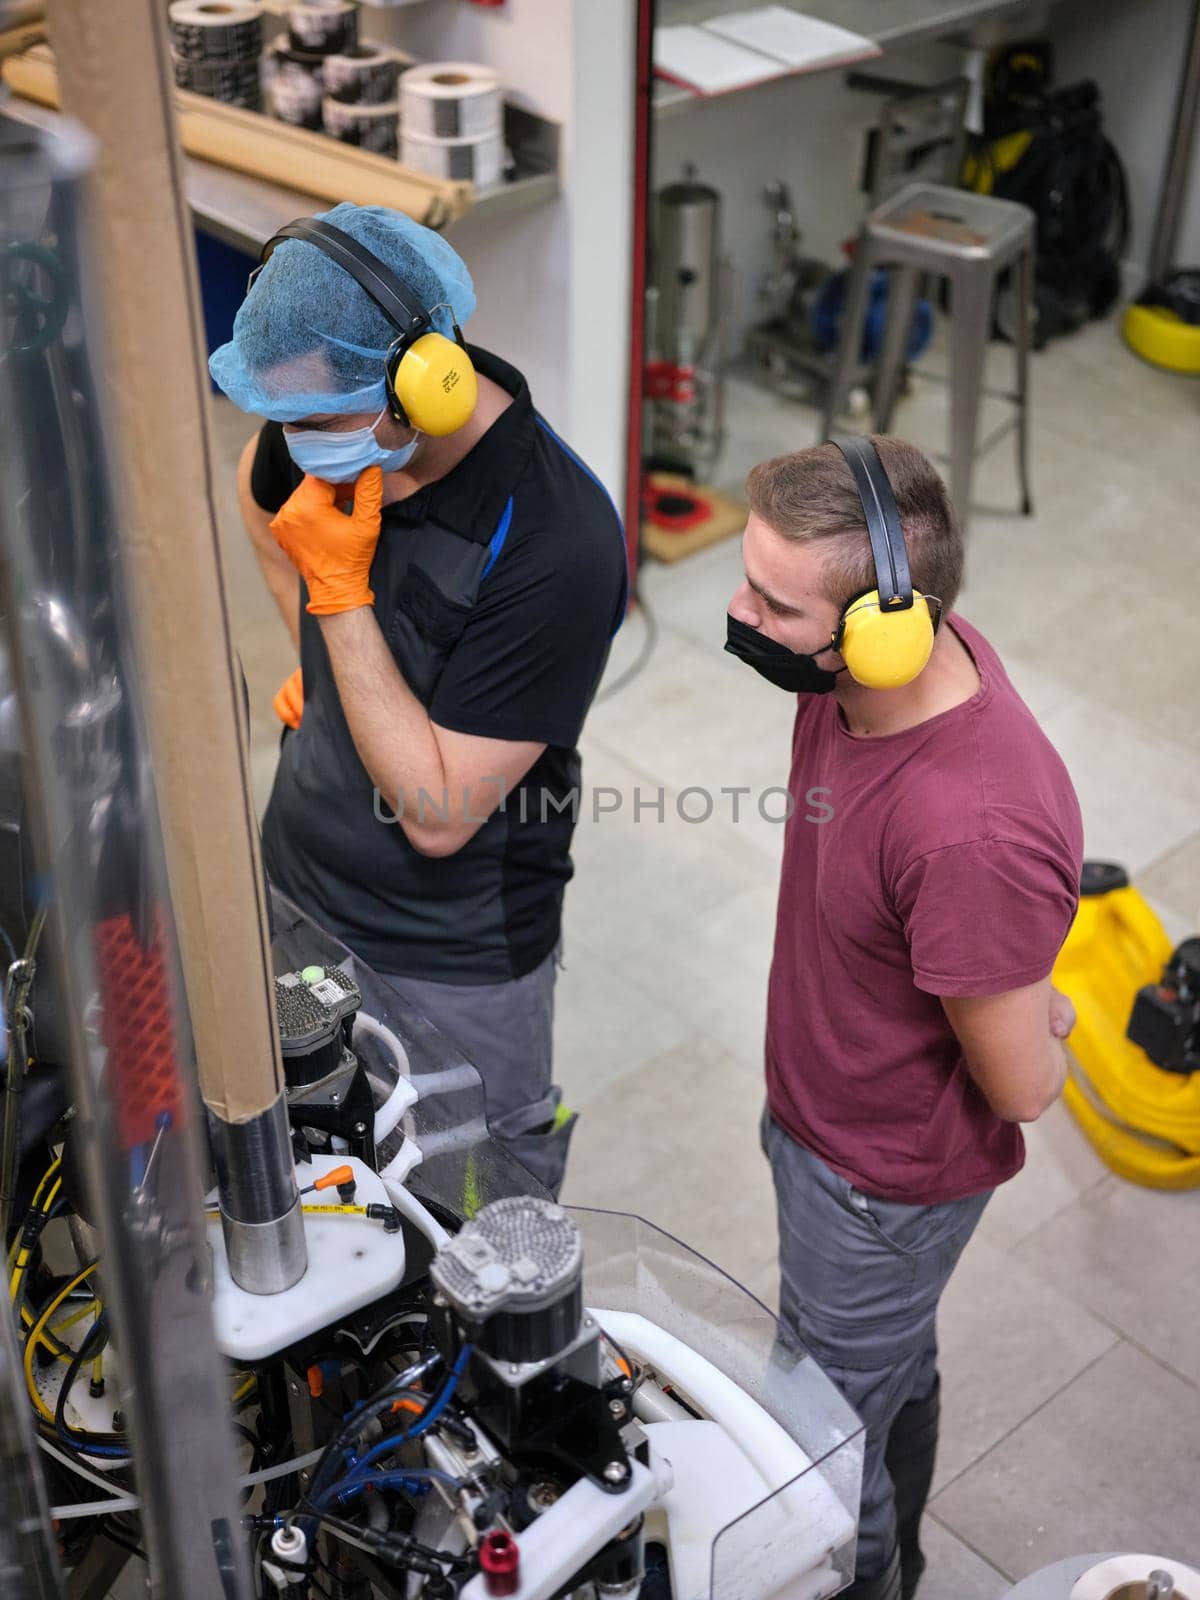 Vertical photo of two workers standing controlling the machinery of a craft beer packaging factory.